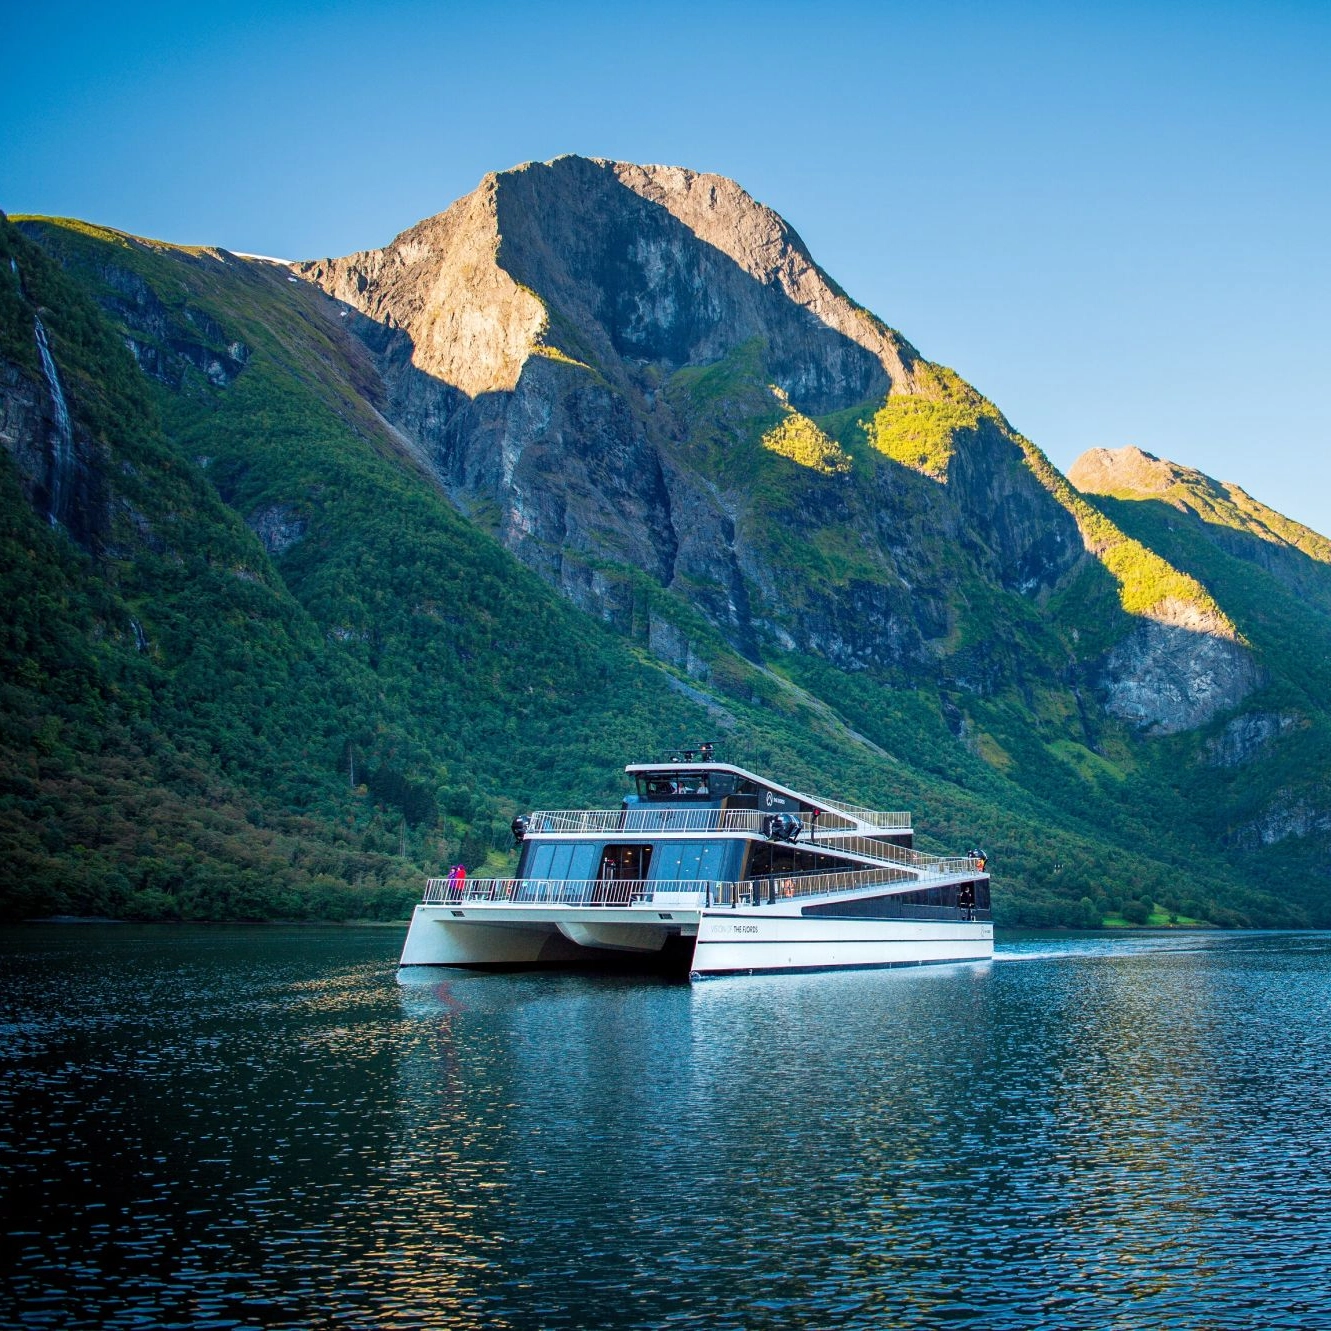 Experience the Nærøyfjord with electric "Vision of the fjords" on the Norway in a nutshell® tour by Fjord Tours